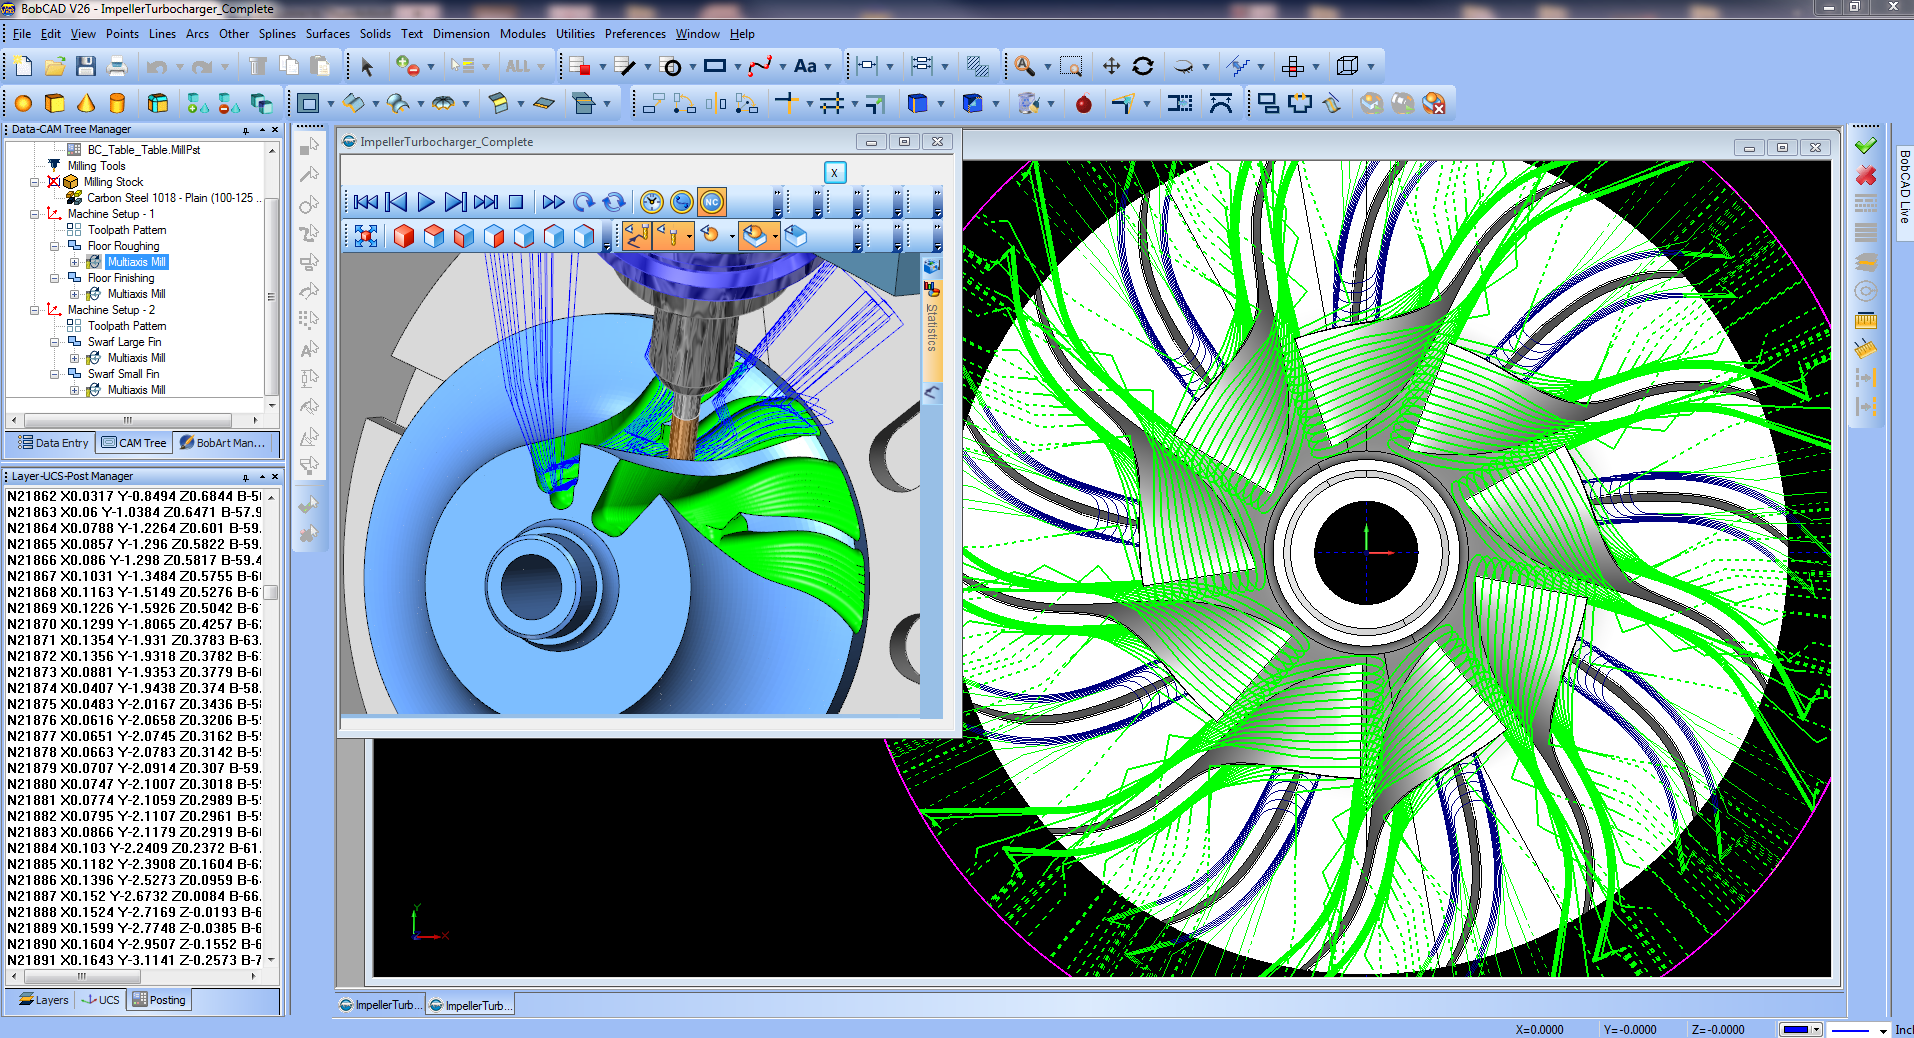 multiaxis-cnc-cad-cam-software-5-axis